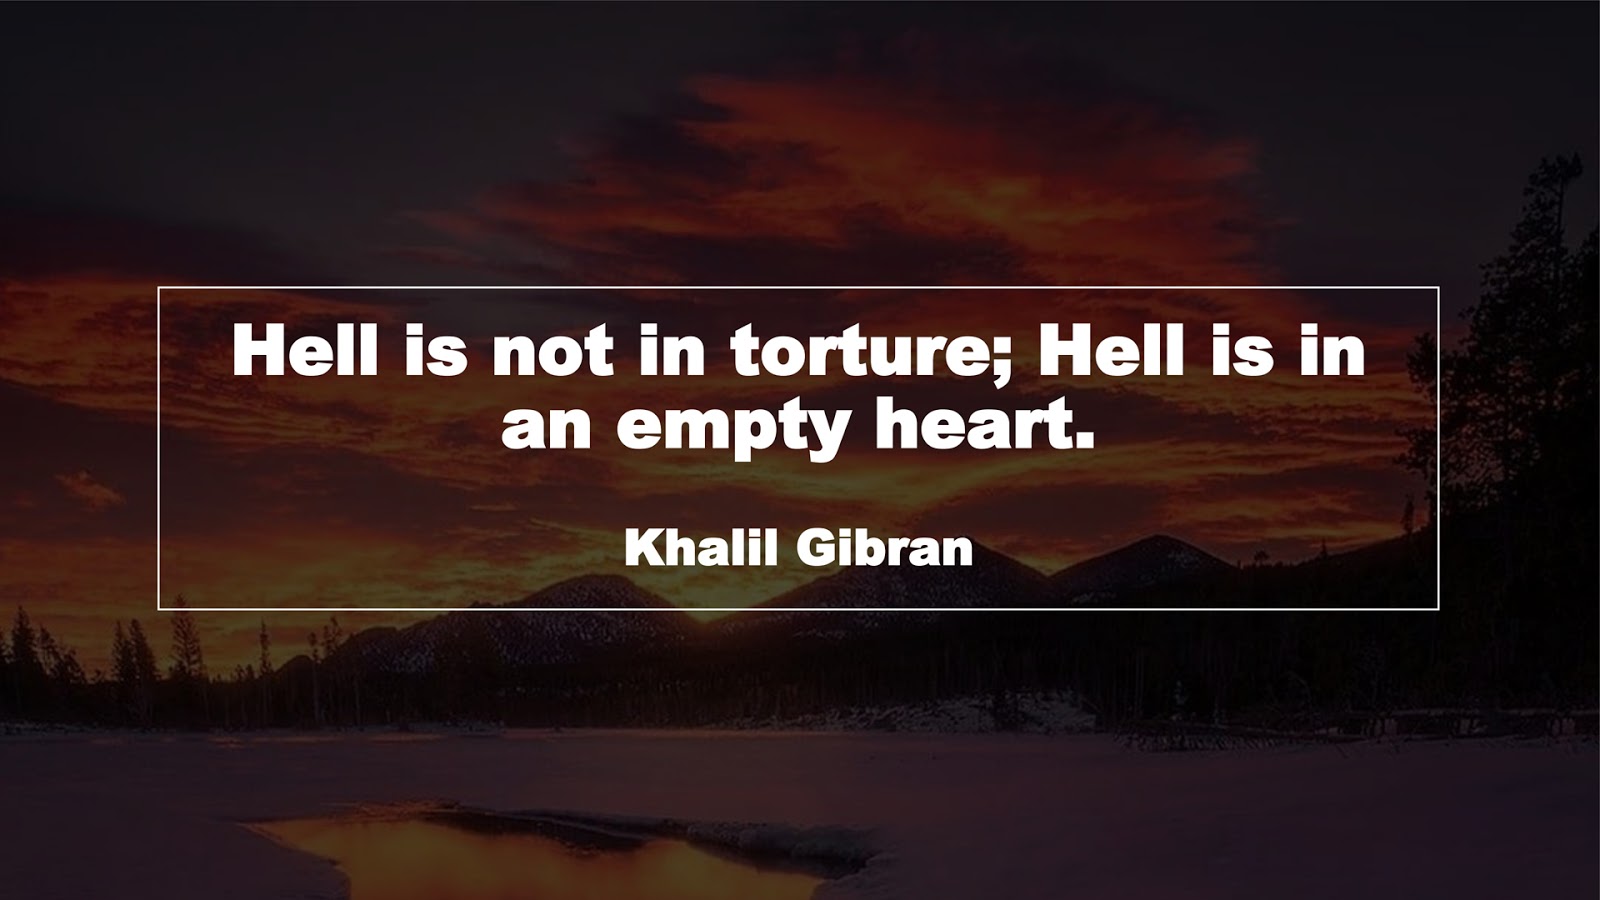 Hell is not in torture; Hell is in an empty heart. (Khalil Gibran)